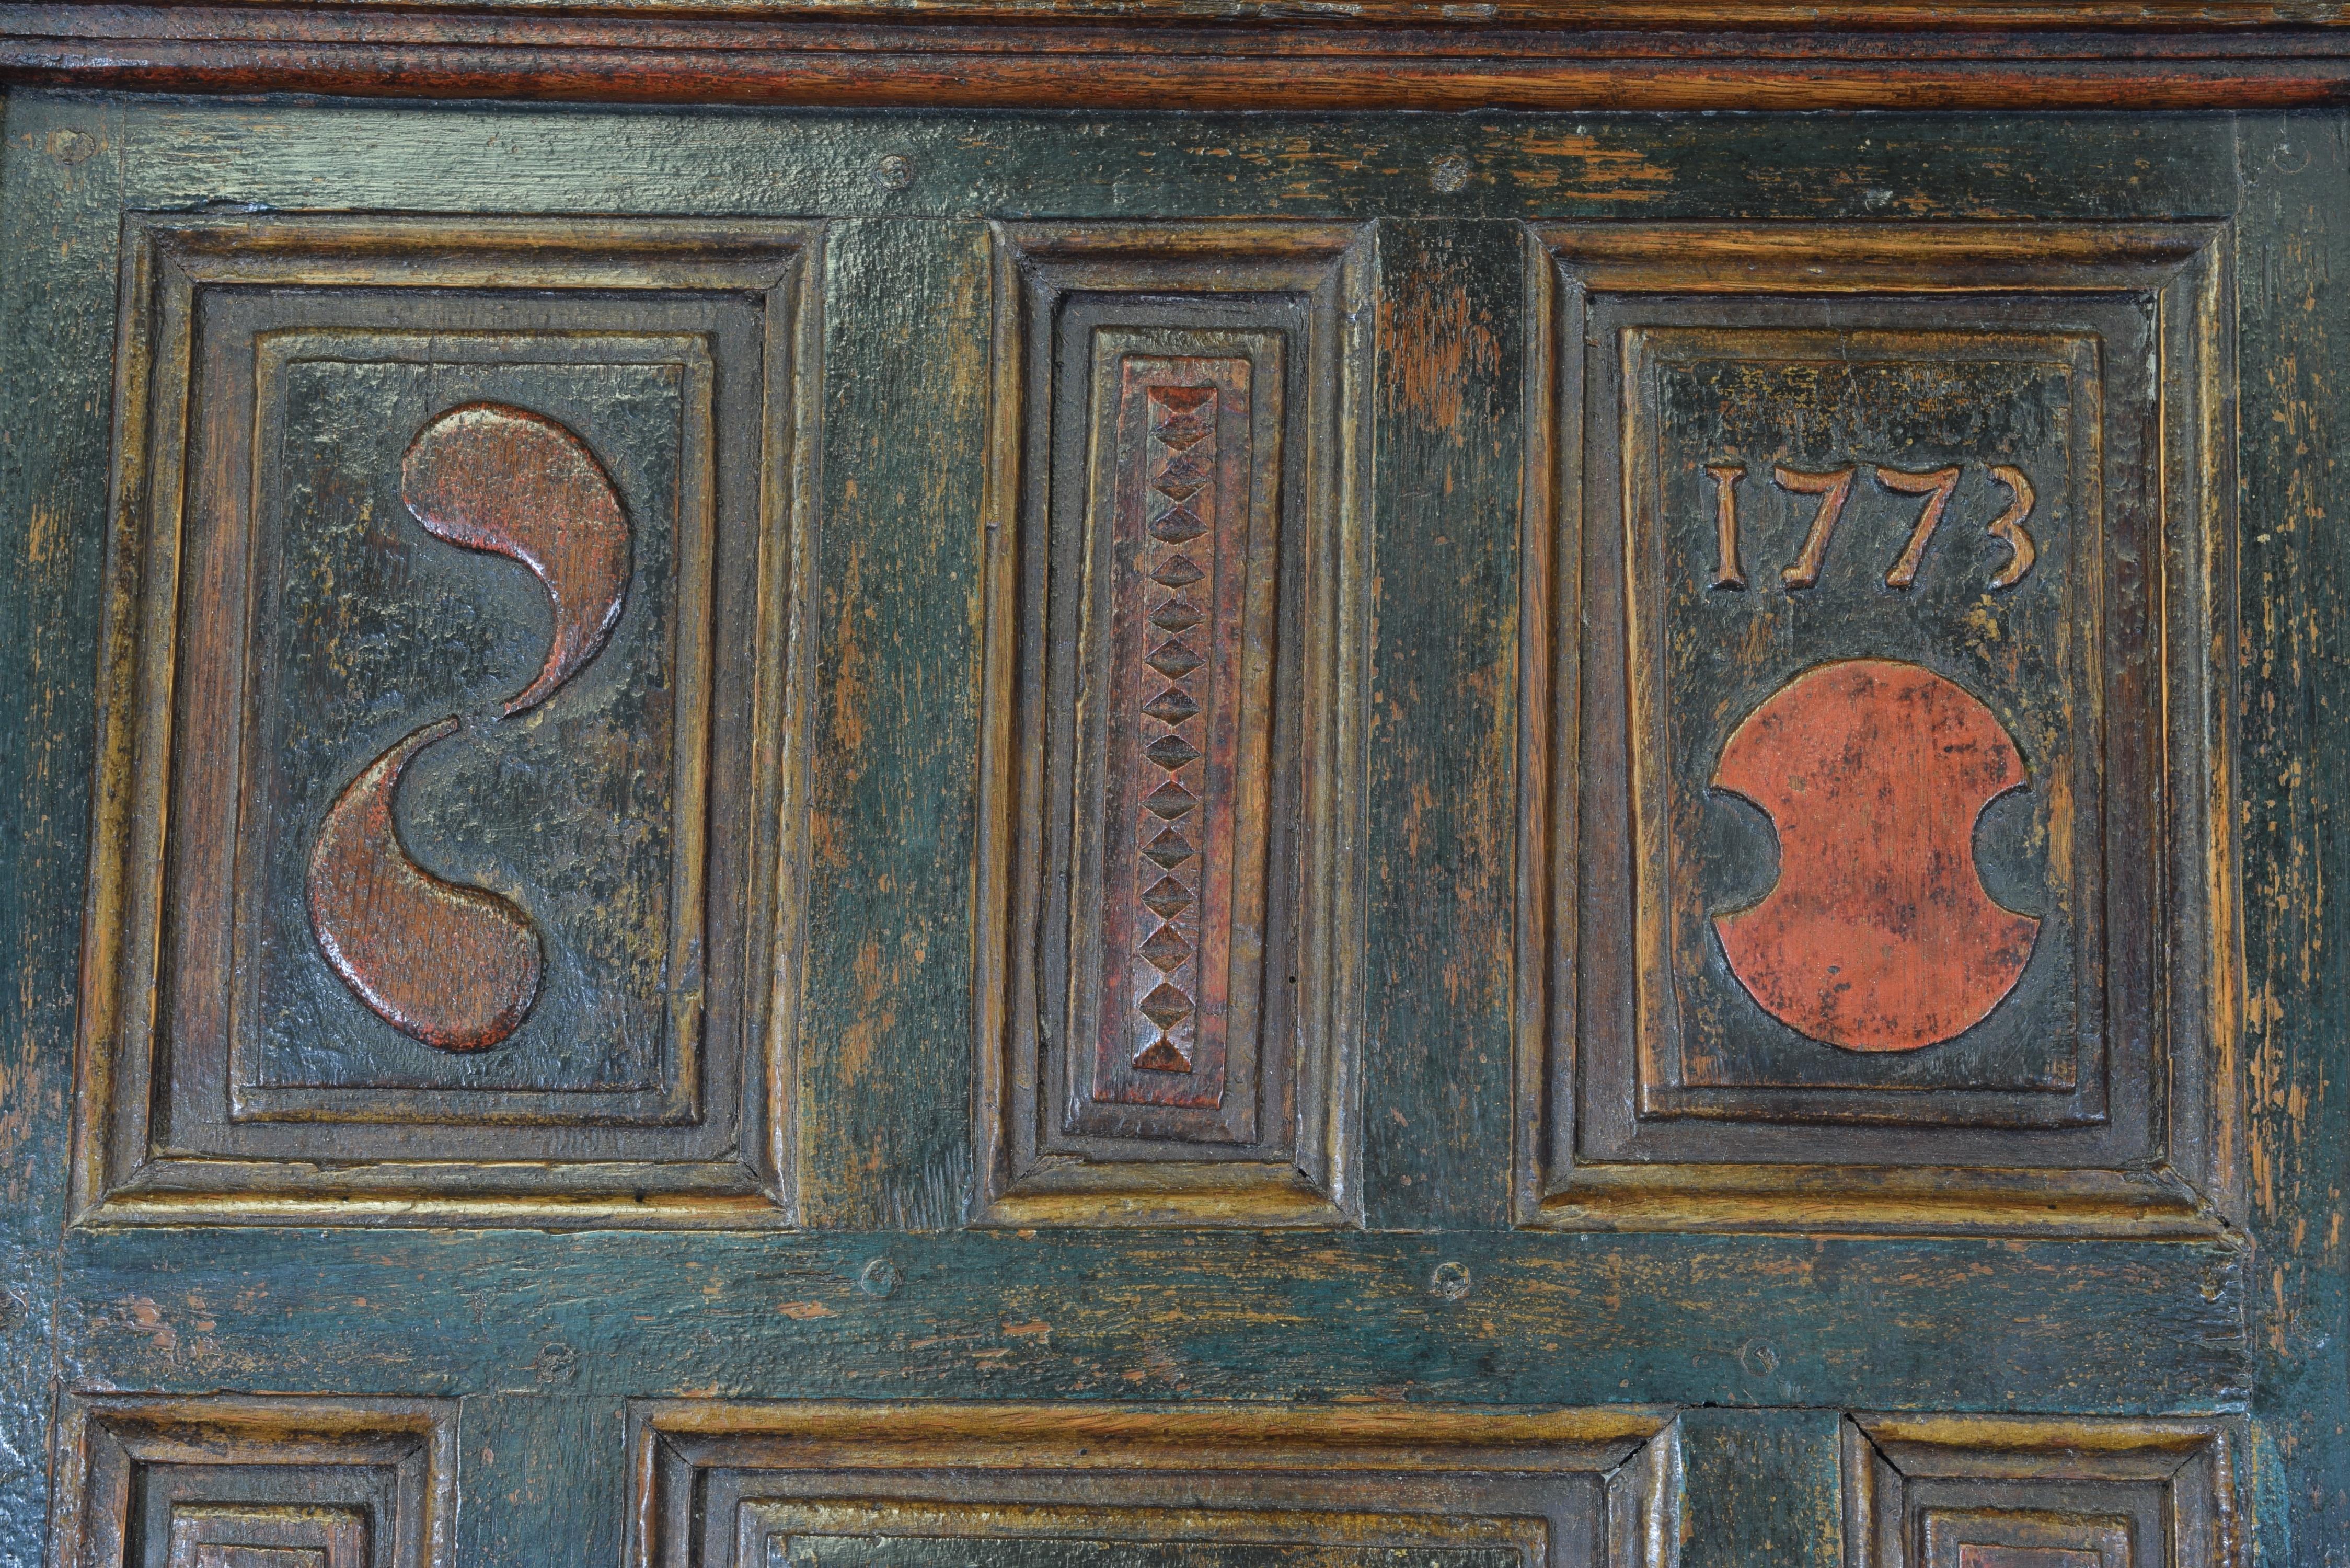 Polychromed Wood and Iron Cupboard. Spain, 1773. Dated 5